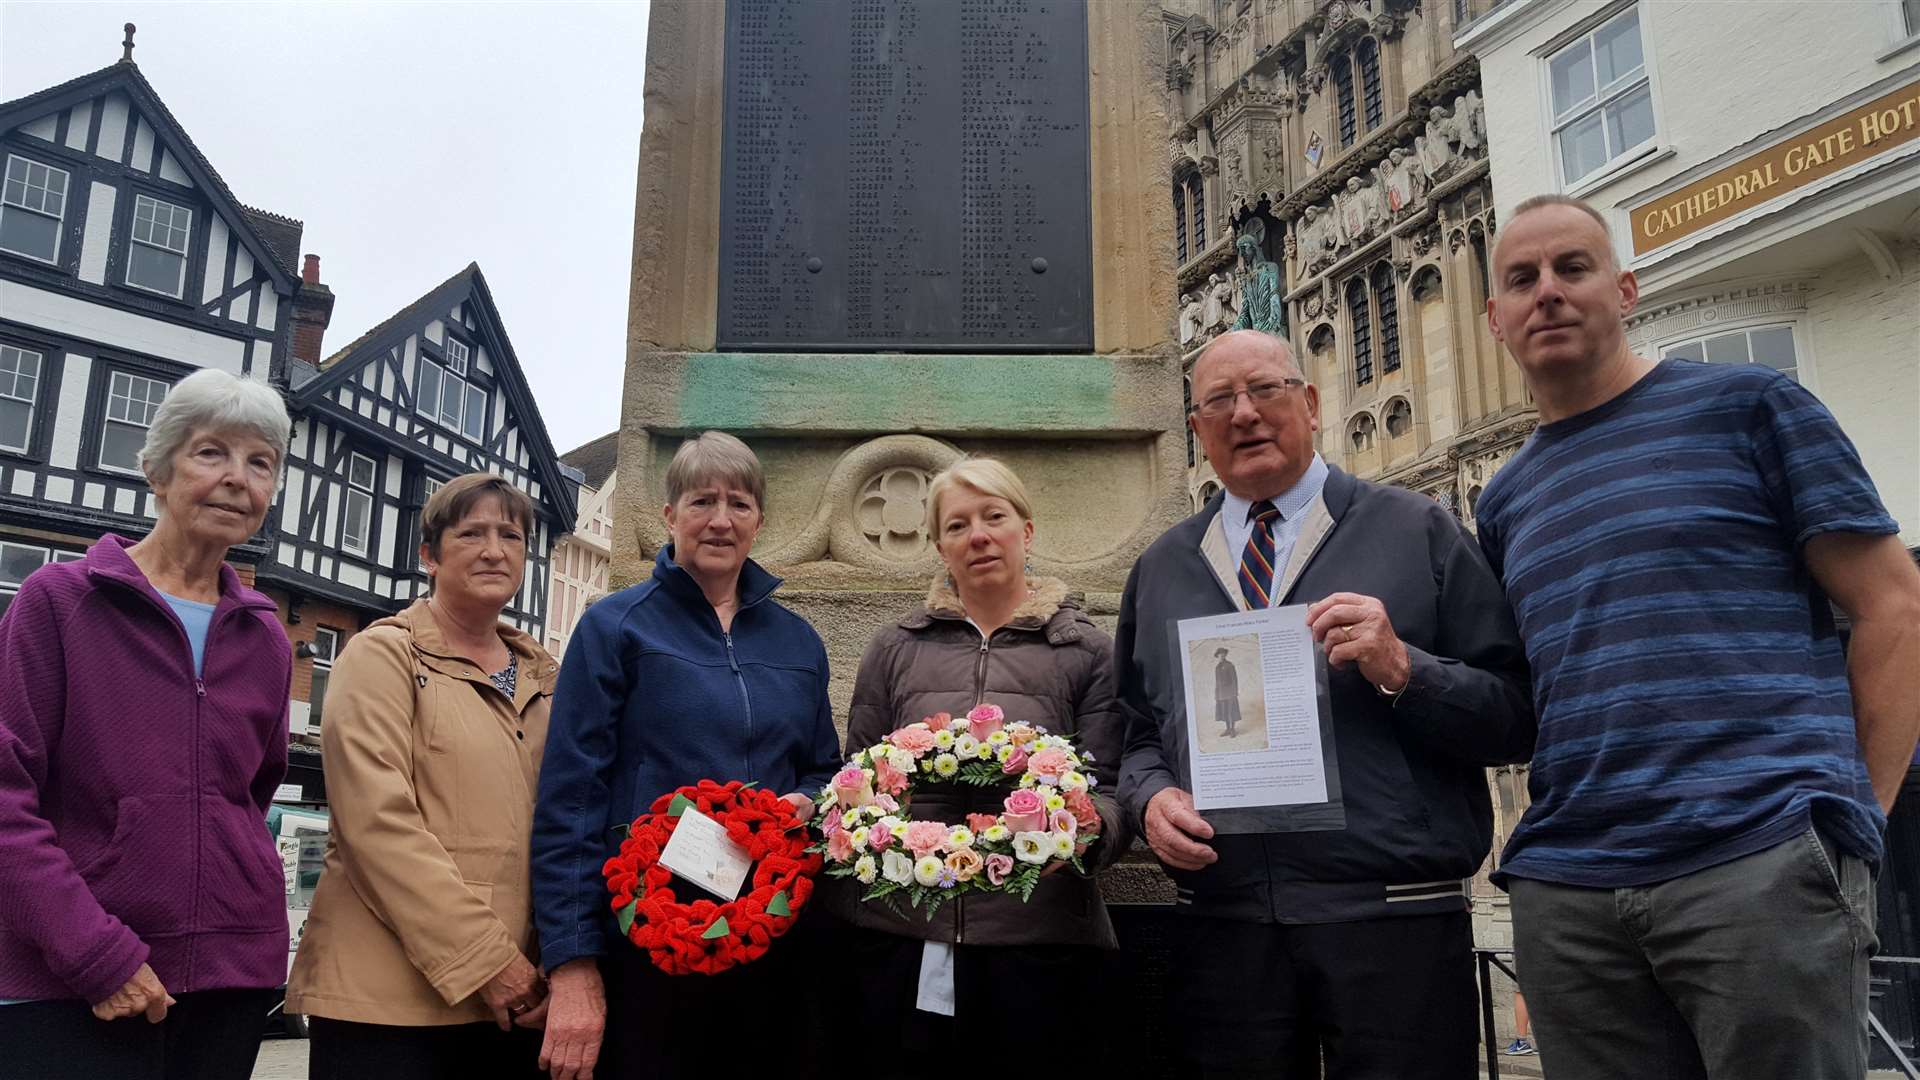 Descendants of Ethel Parker gather to lay a wreath at the Buttermarket memorial to mark the 100th anniversary of her death